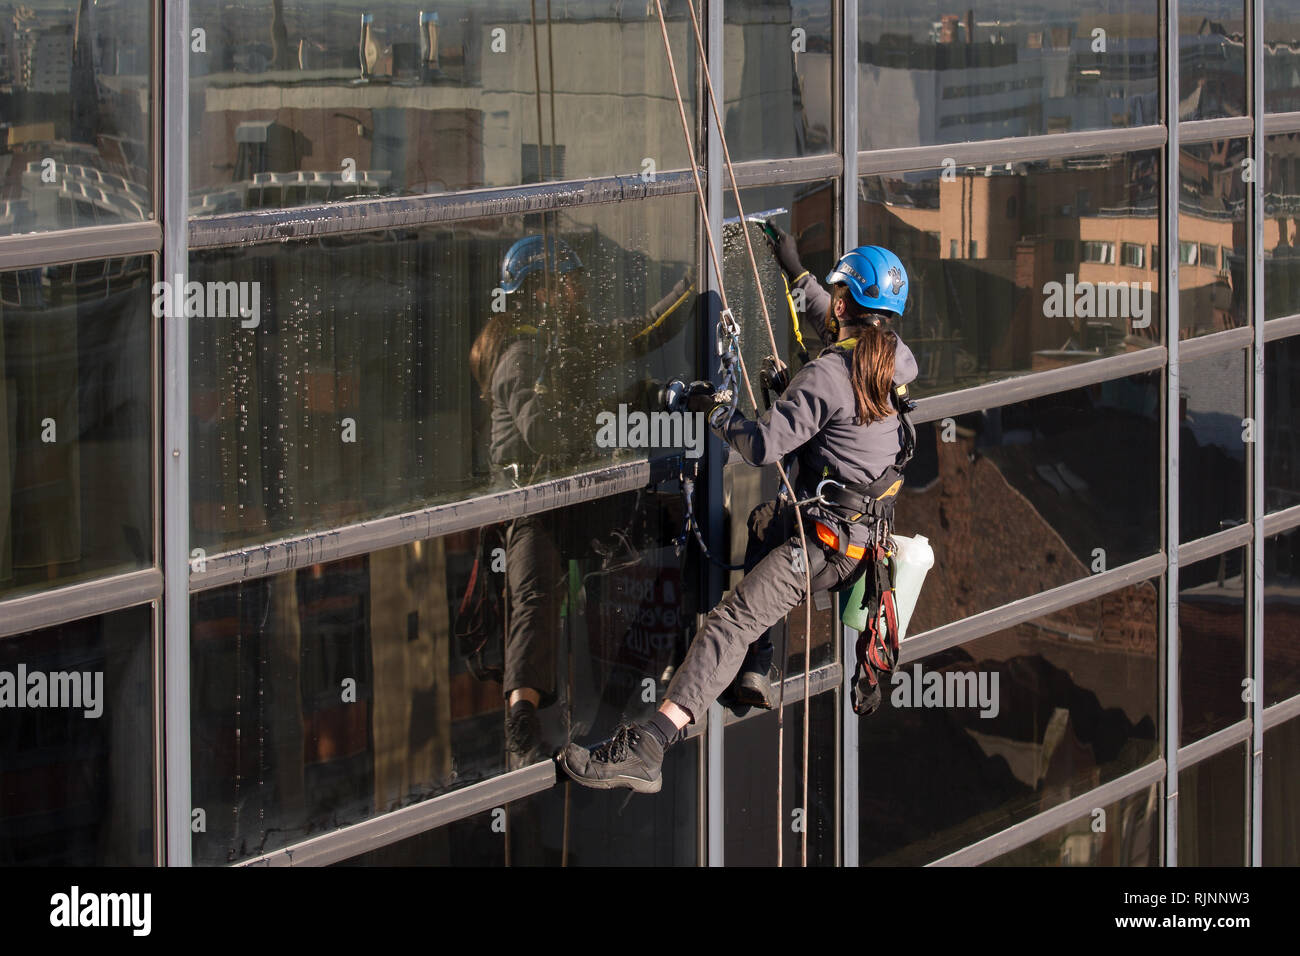 Premium Photo  Window cleaning in high-rise buildings, houses